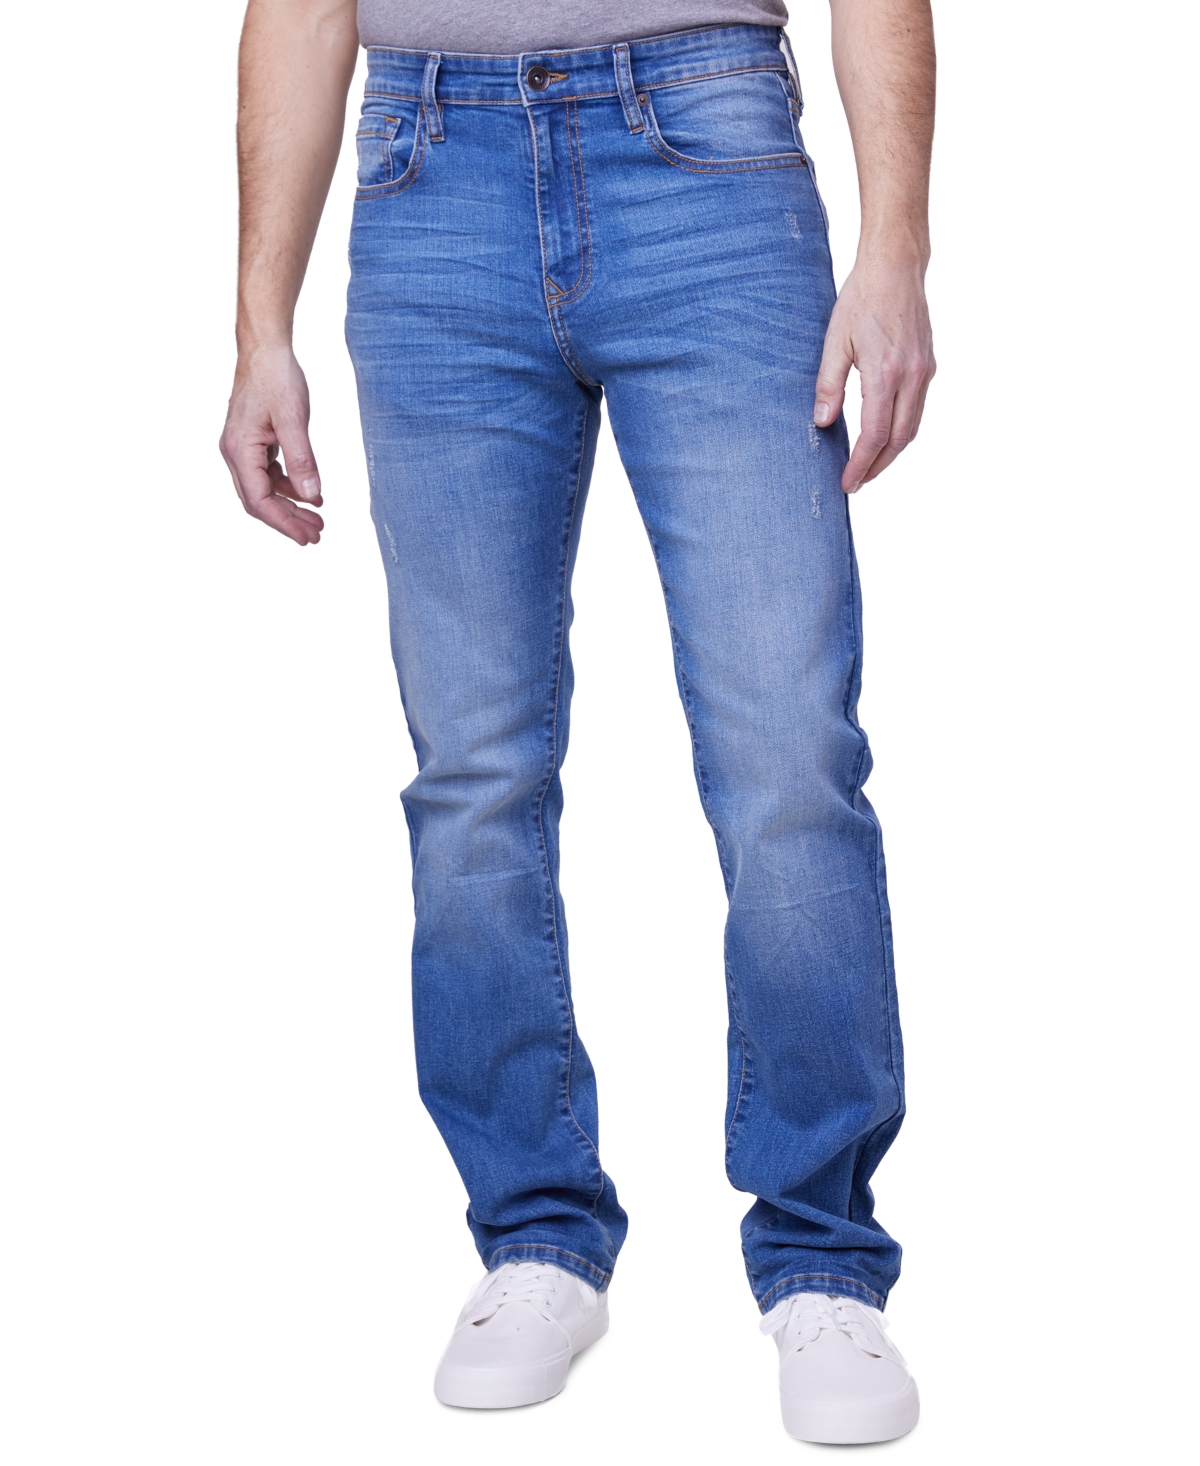 Men's Straight-Fit Jeans - Henry